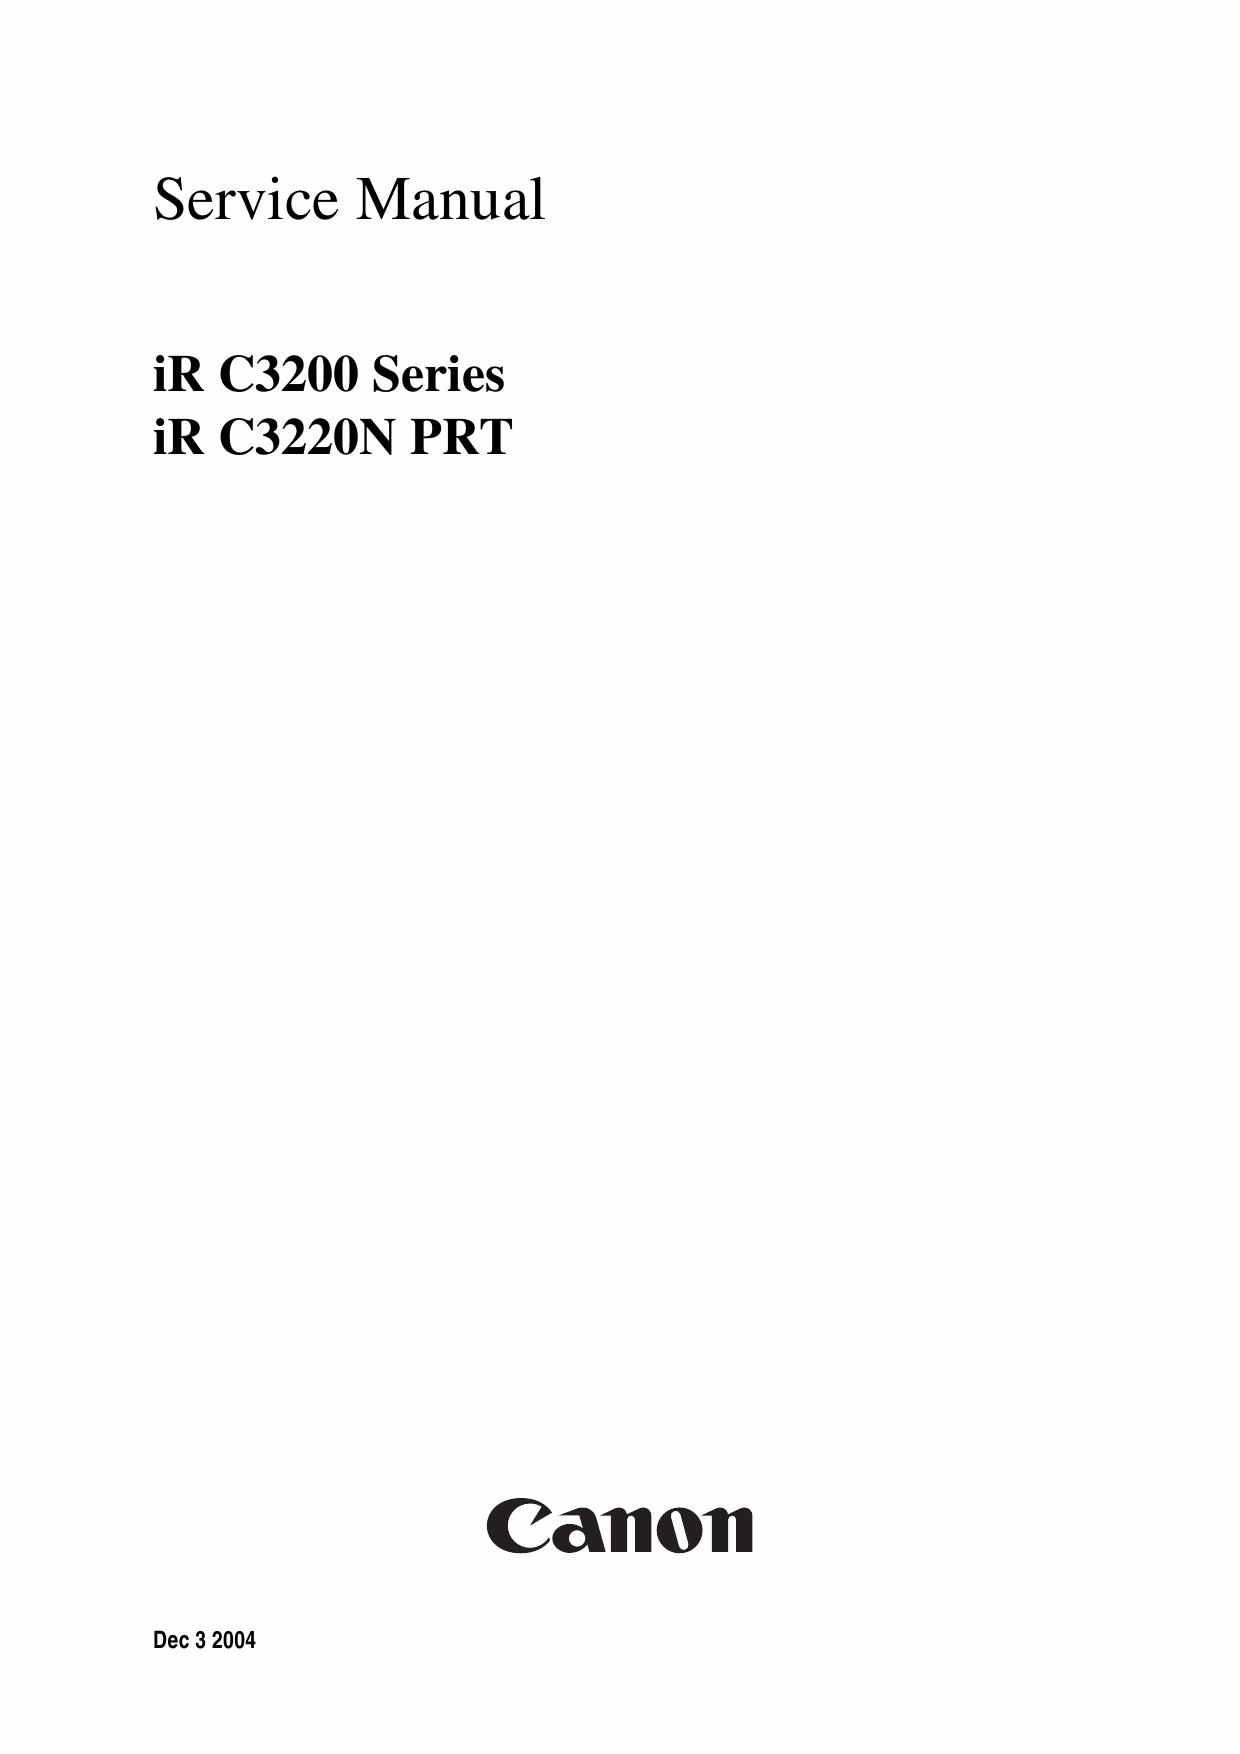 Canon imageRUNNER iR-C3200 C3200N Parts and Service Manual-1